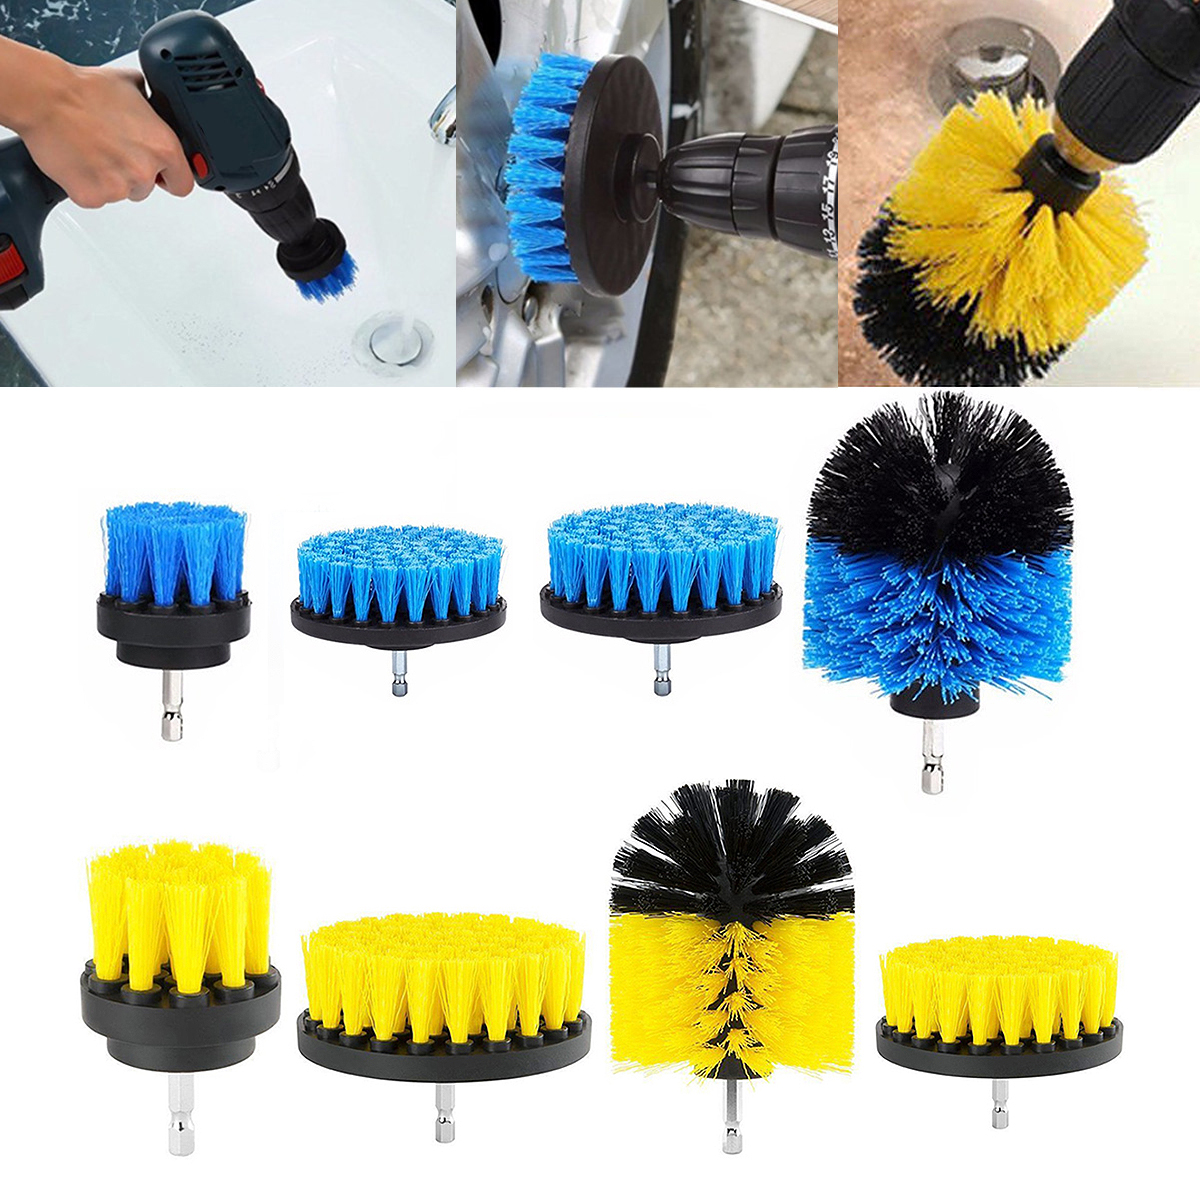 4pcs-Drill-Scrubber-Brush-Cleaning-Brush-Power-Tool-Electric-Bristle-Bathtub-Tile-Grout-Cleaner-1581992-1